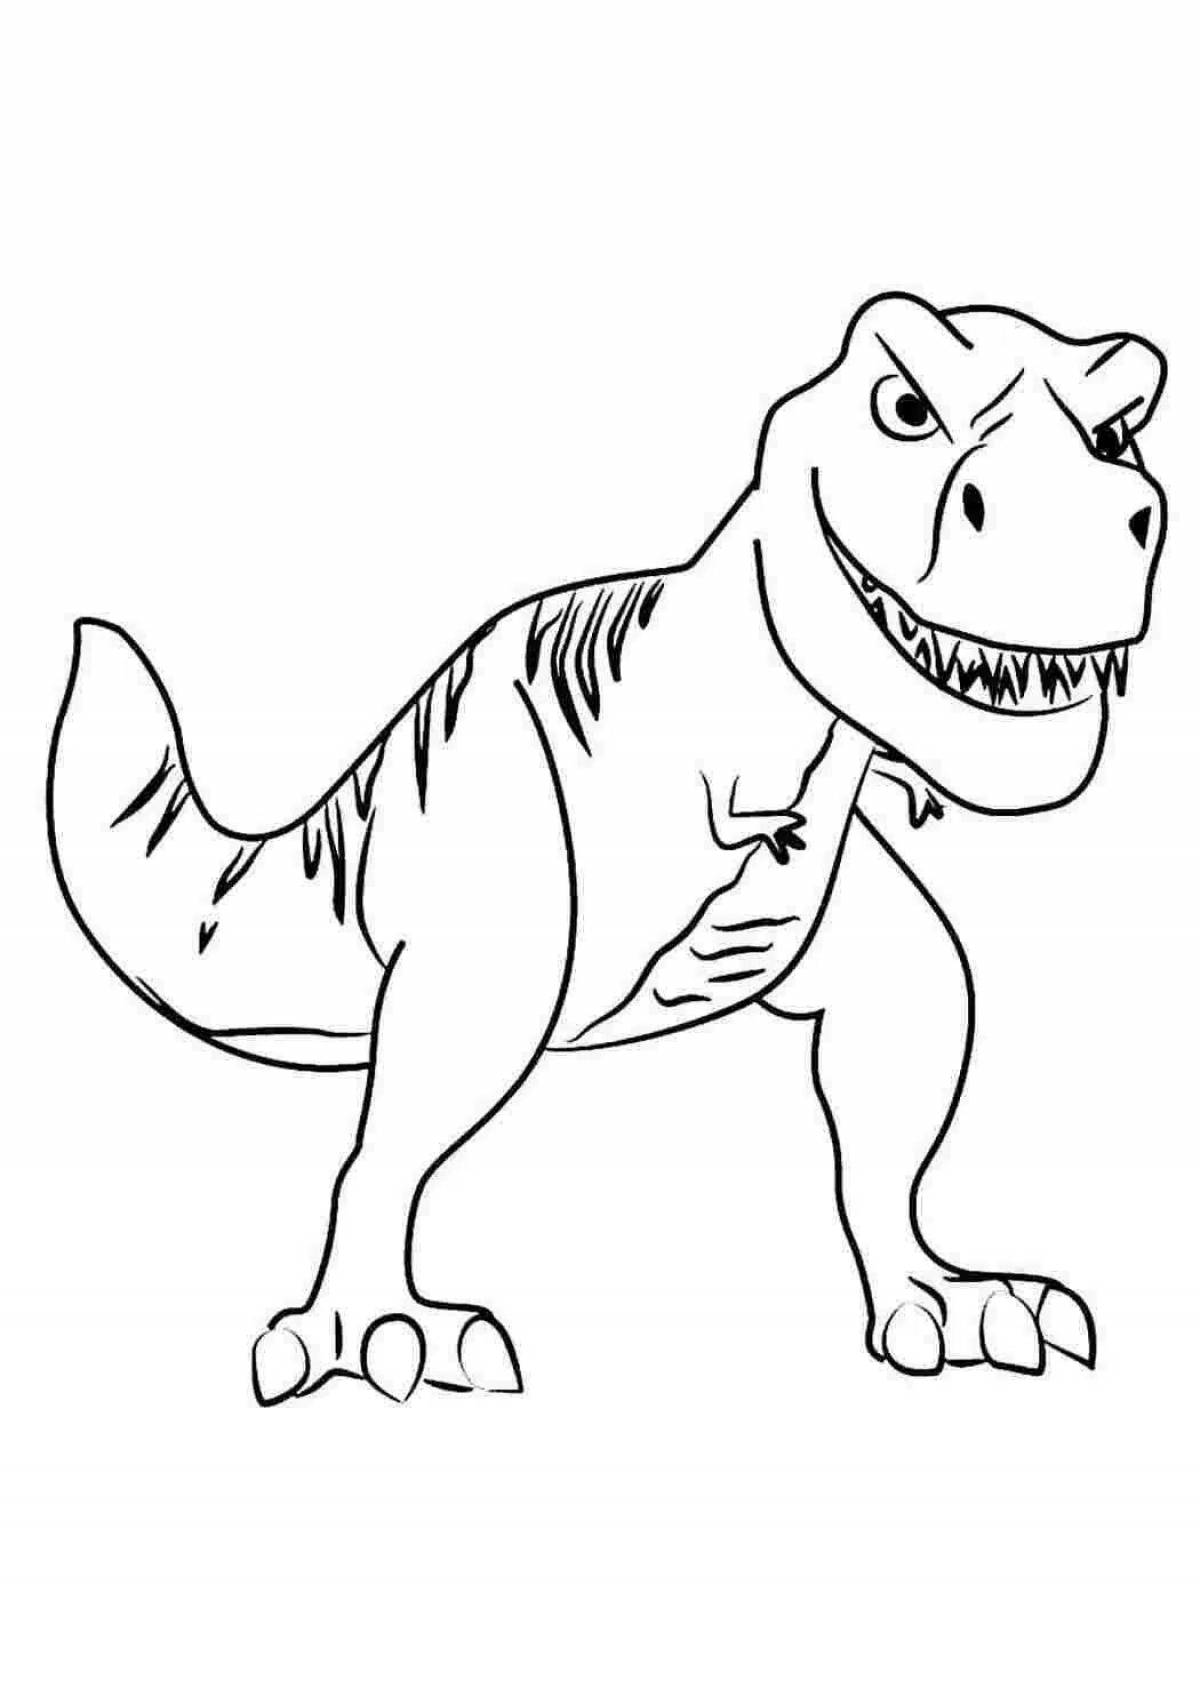 Bright t-rex coloring page